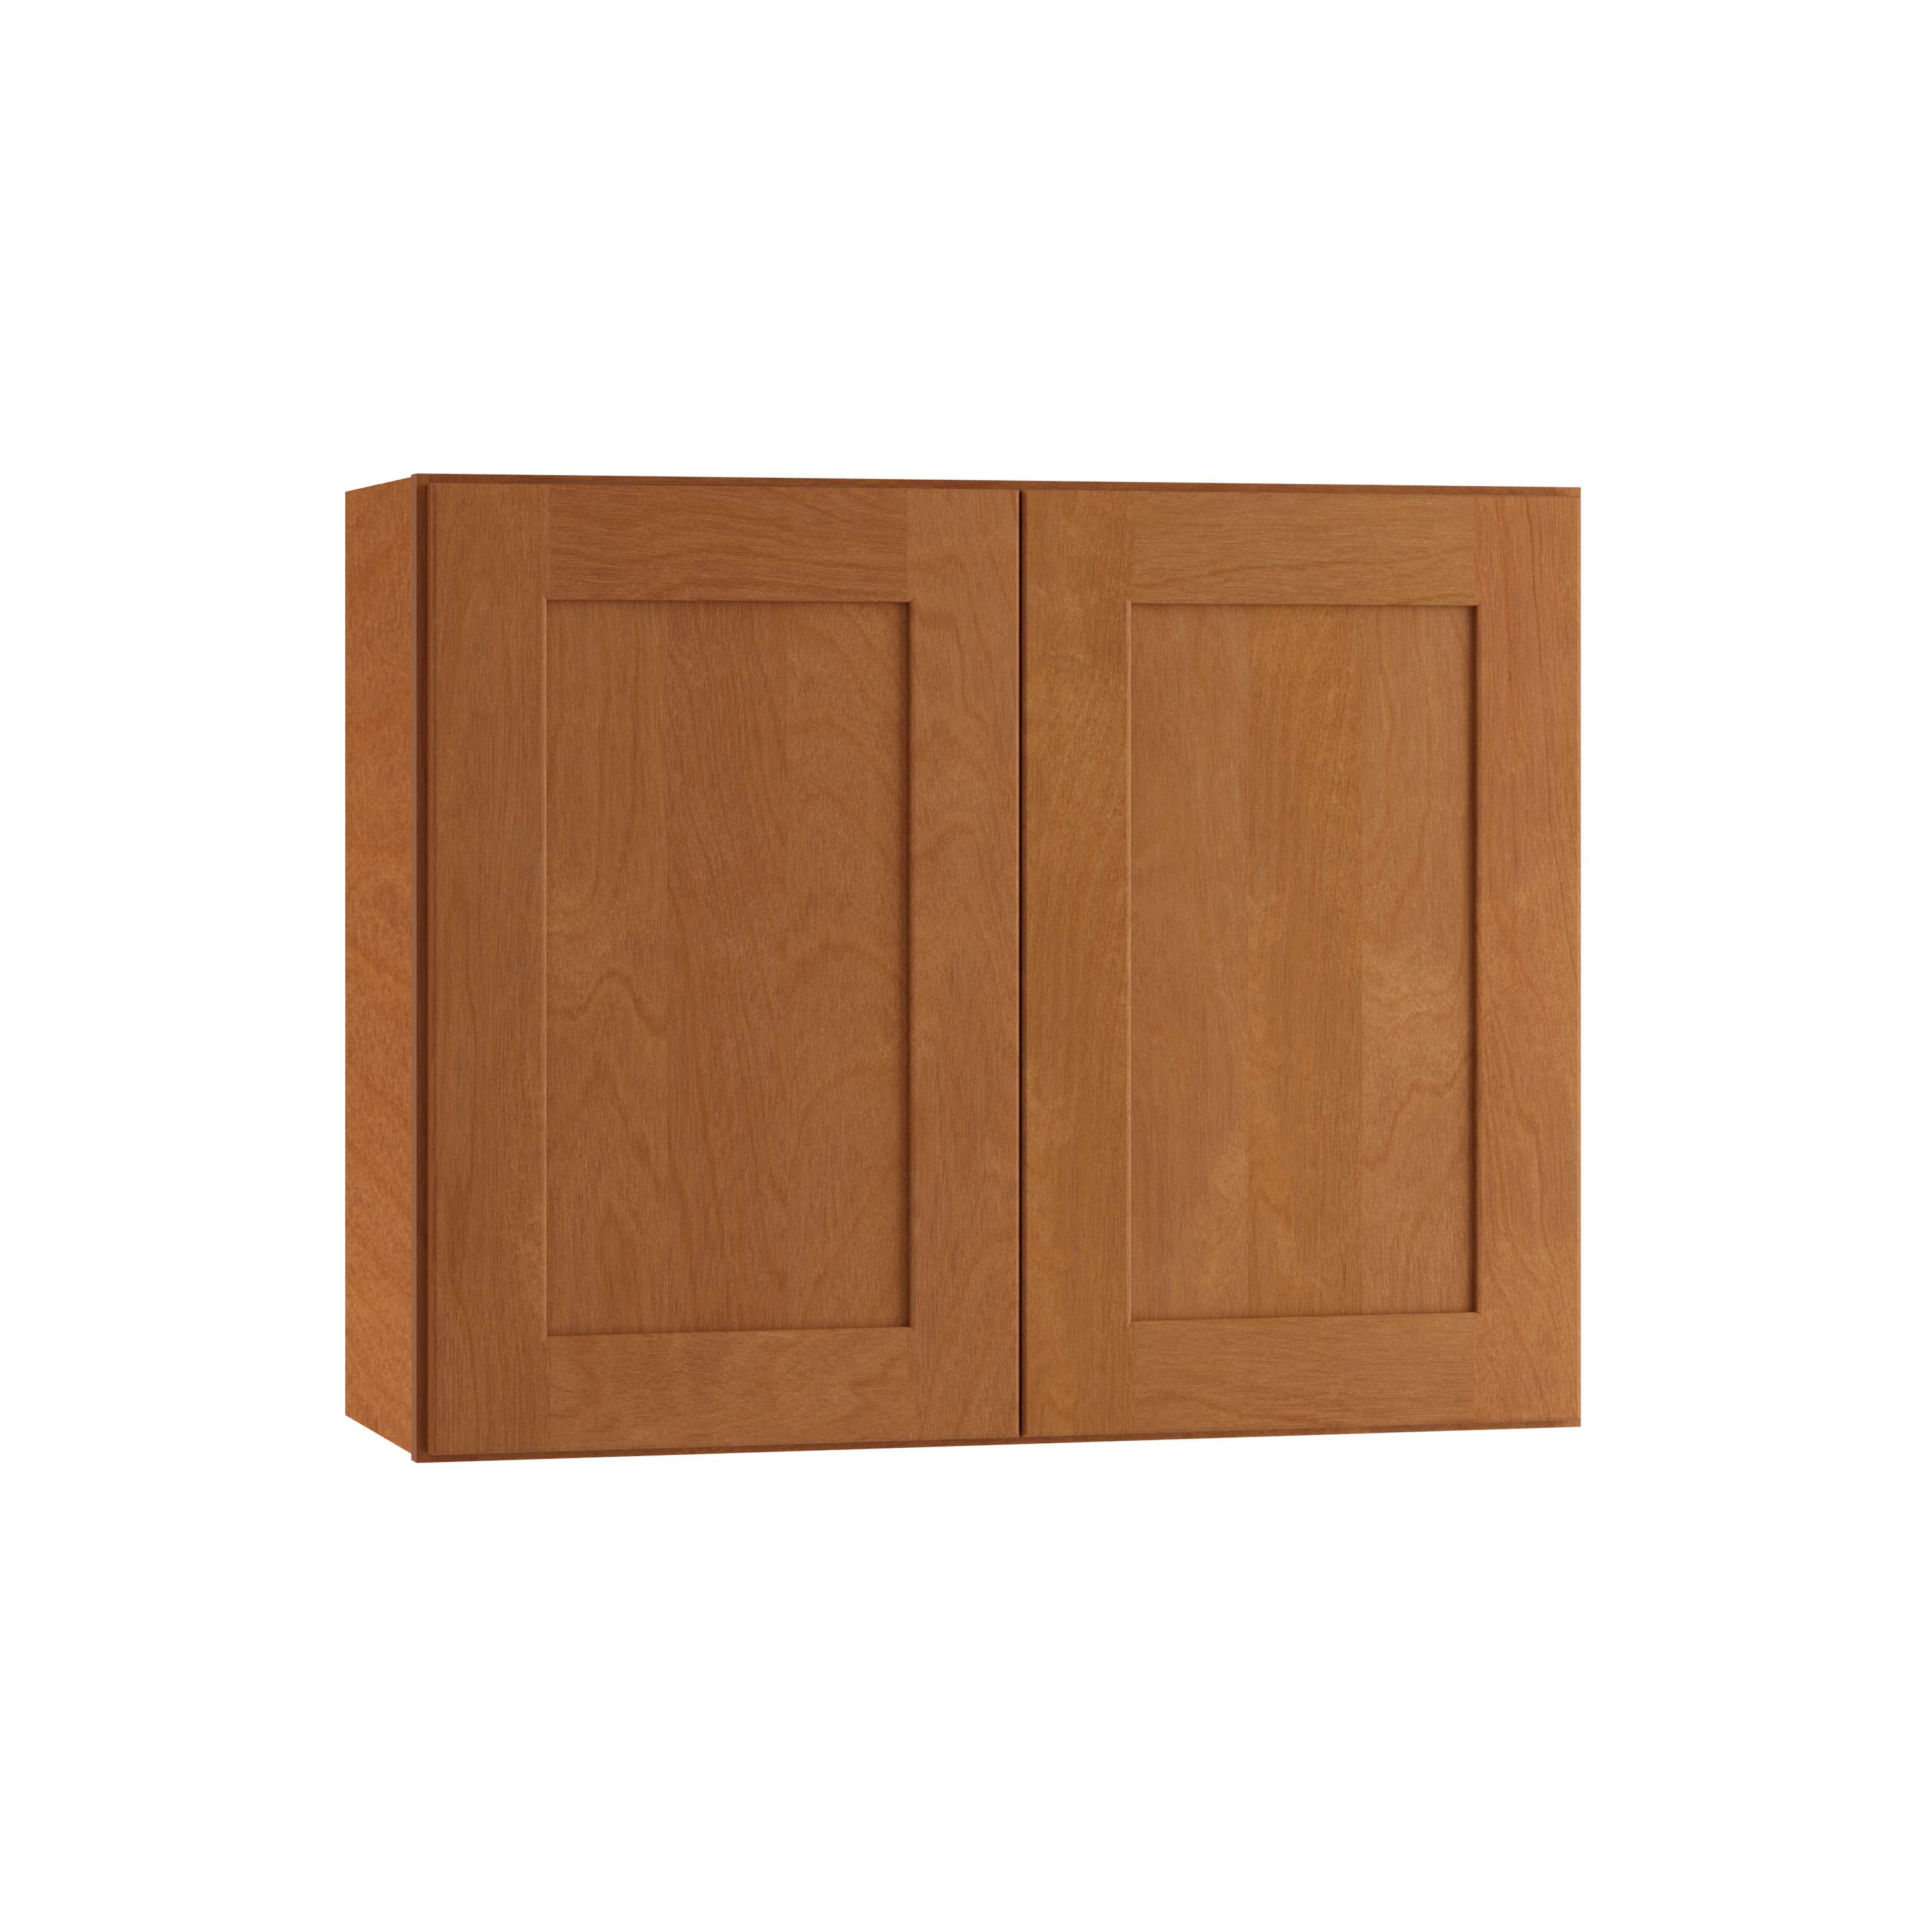 Luxxe Cabinetry Heston 24-in W x 18-in H x 12-in D Cider Door Wall ...